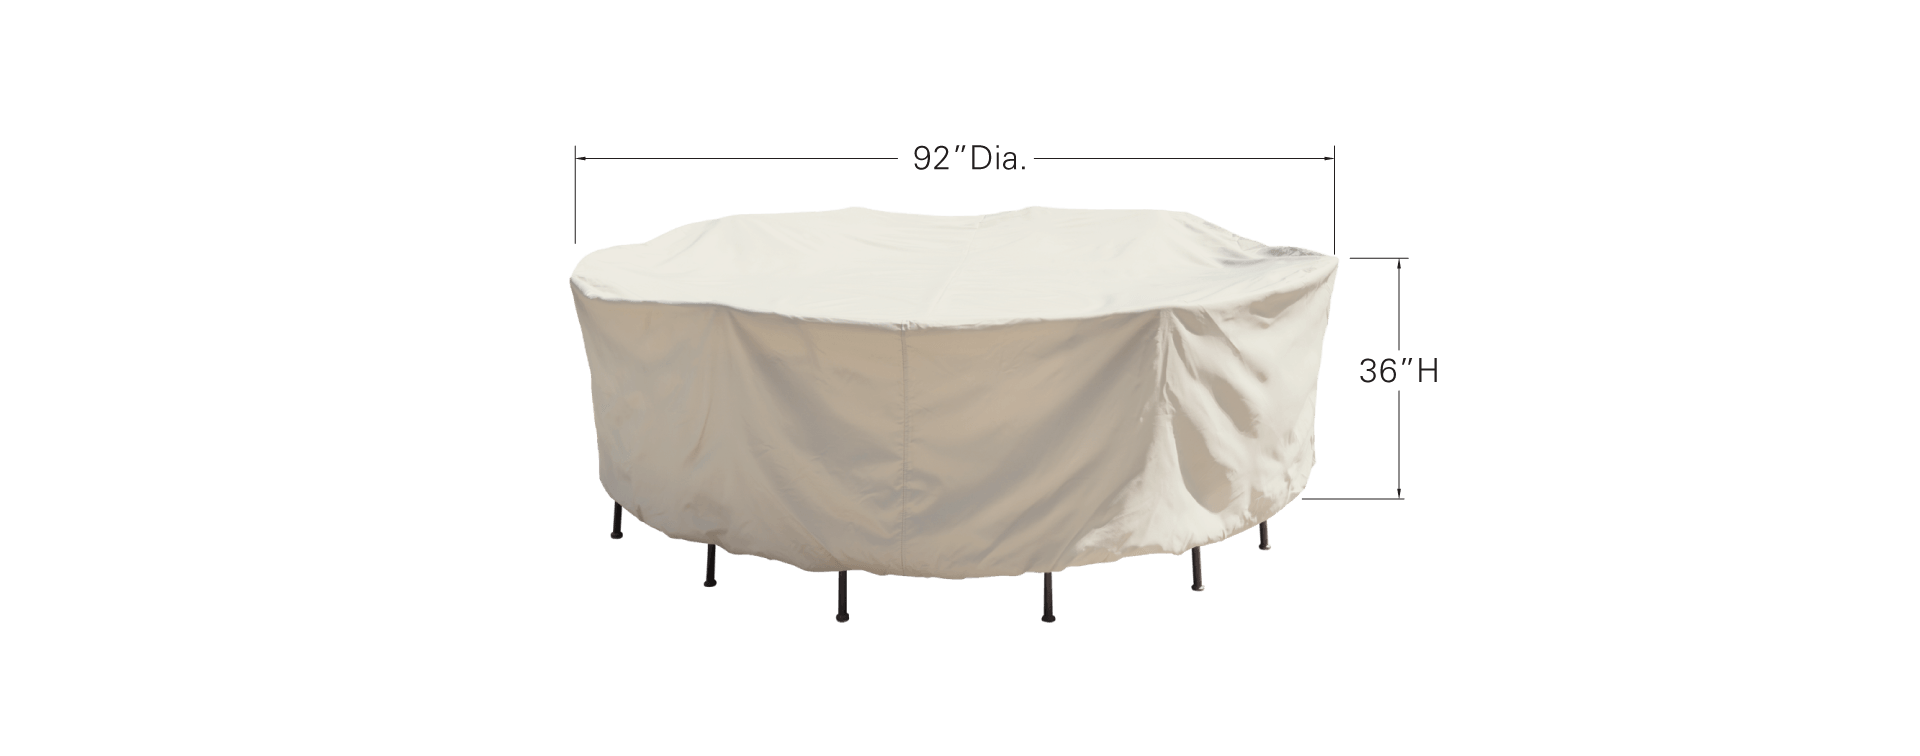 54" Round/Square Table & Chairs Protective Cover